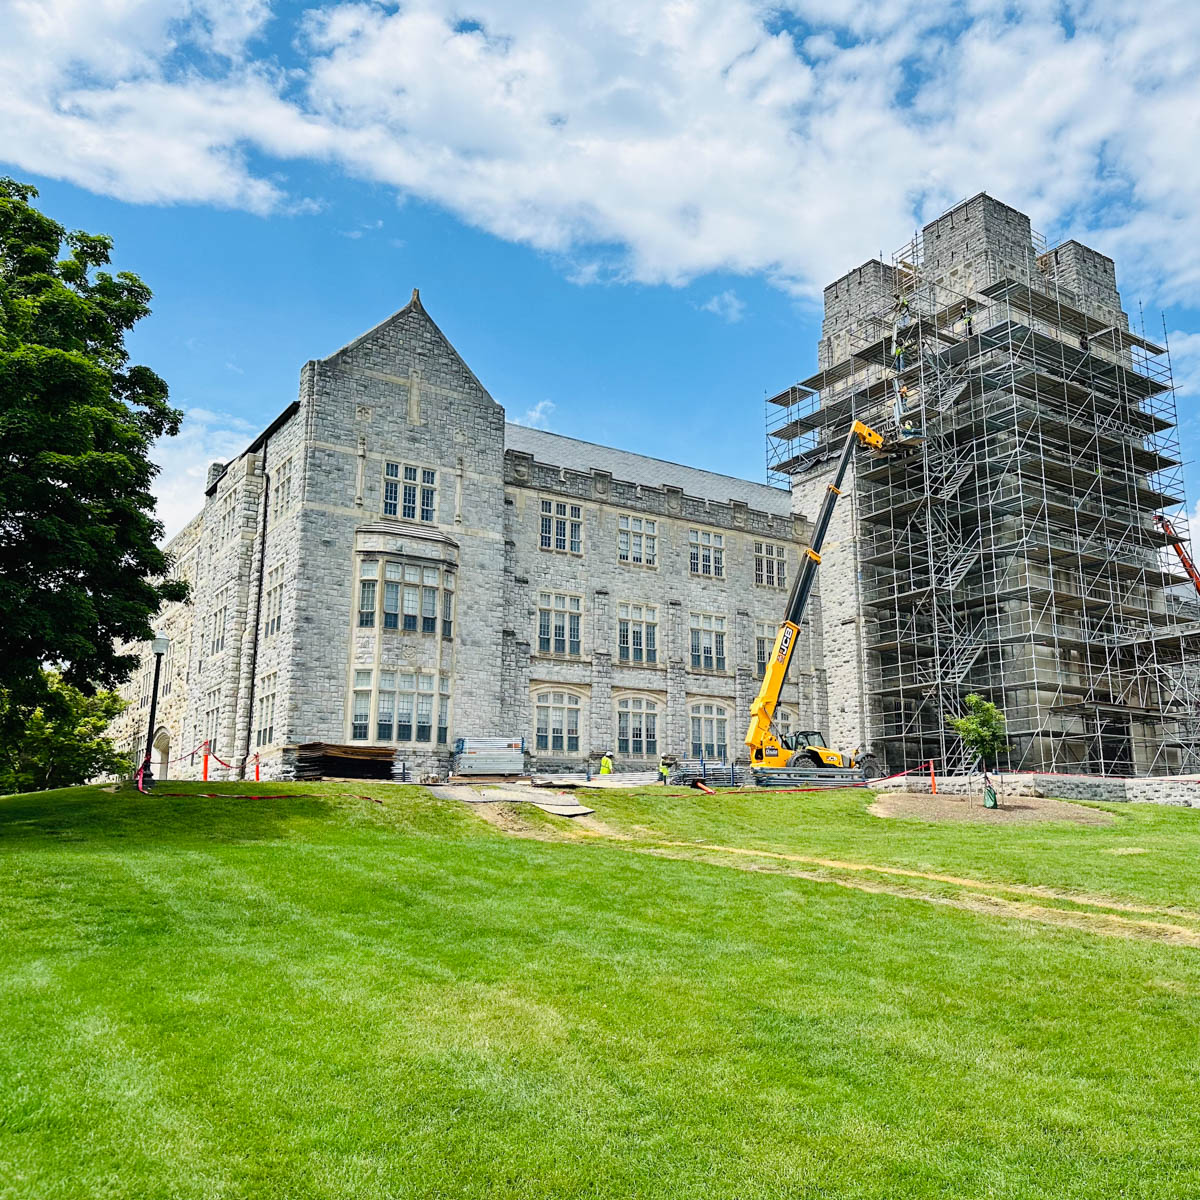 The outside of Burruss Hall is covered in scaffolding as it undergoes a surface update.